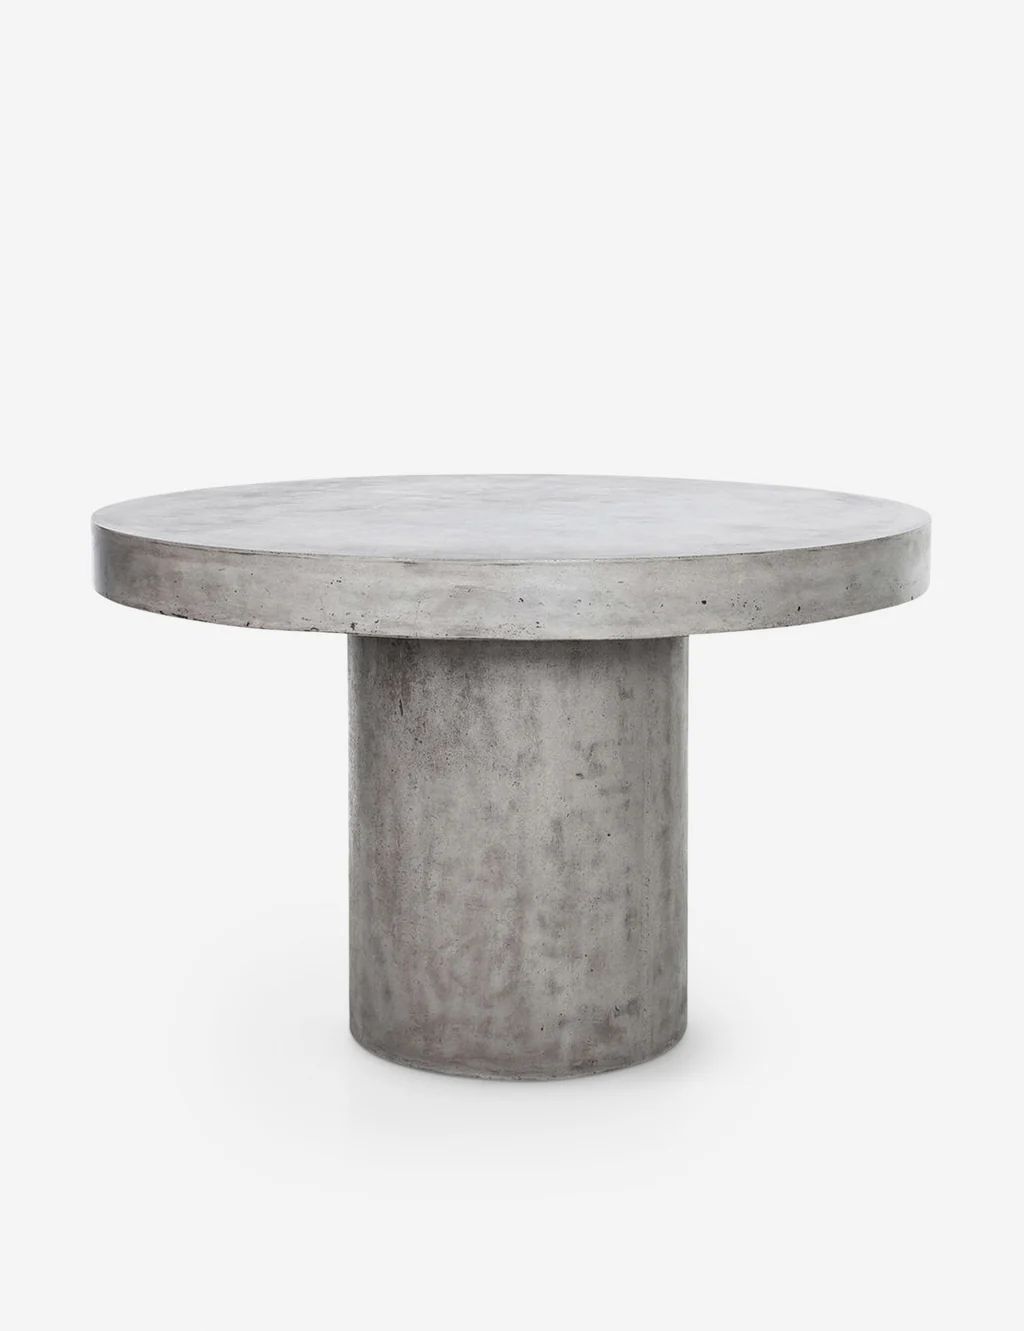 Stein Indoor / Outdoor Round Dining Table | Lulu and Georgia 